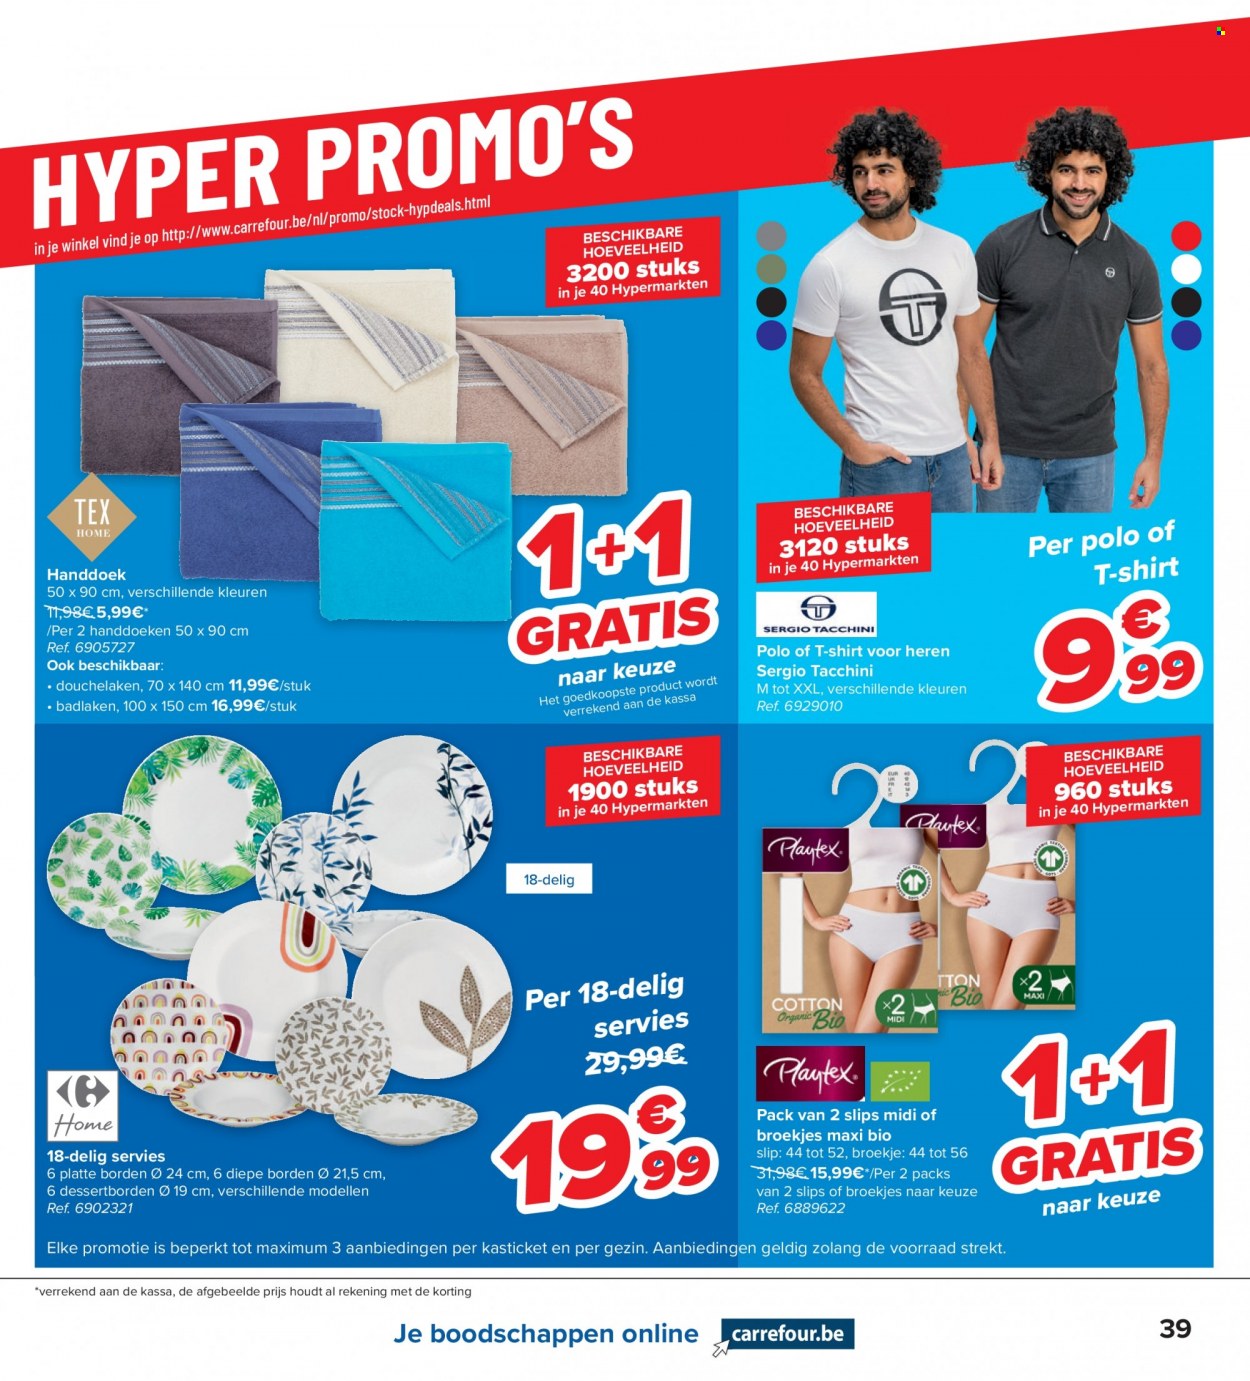 Catalogue Carrefour hypermarkt - 22.3.2023 - 3.4.2023. Page 19.